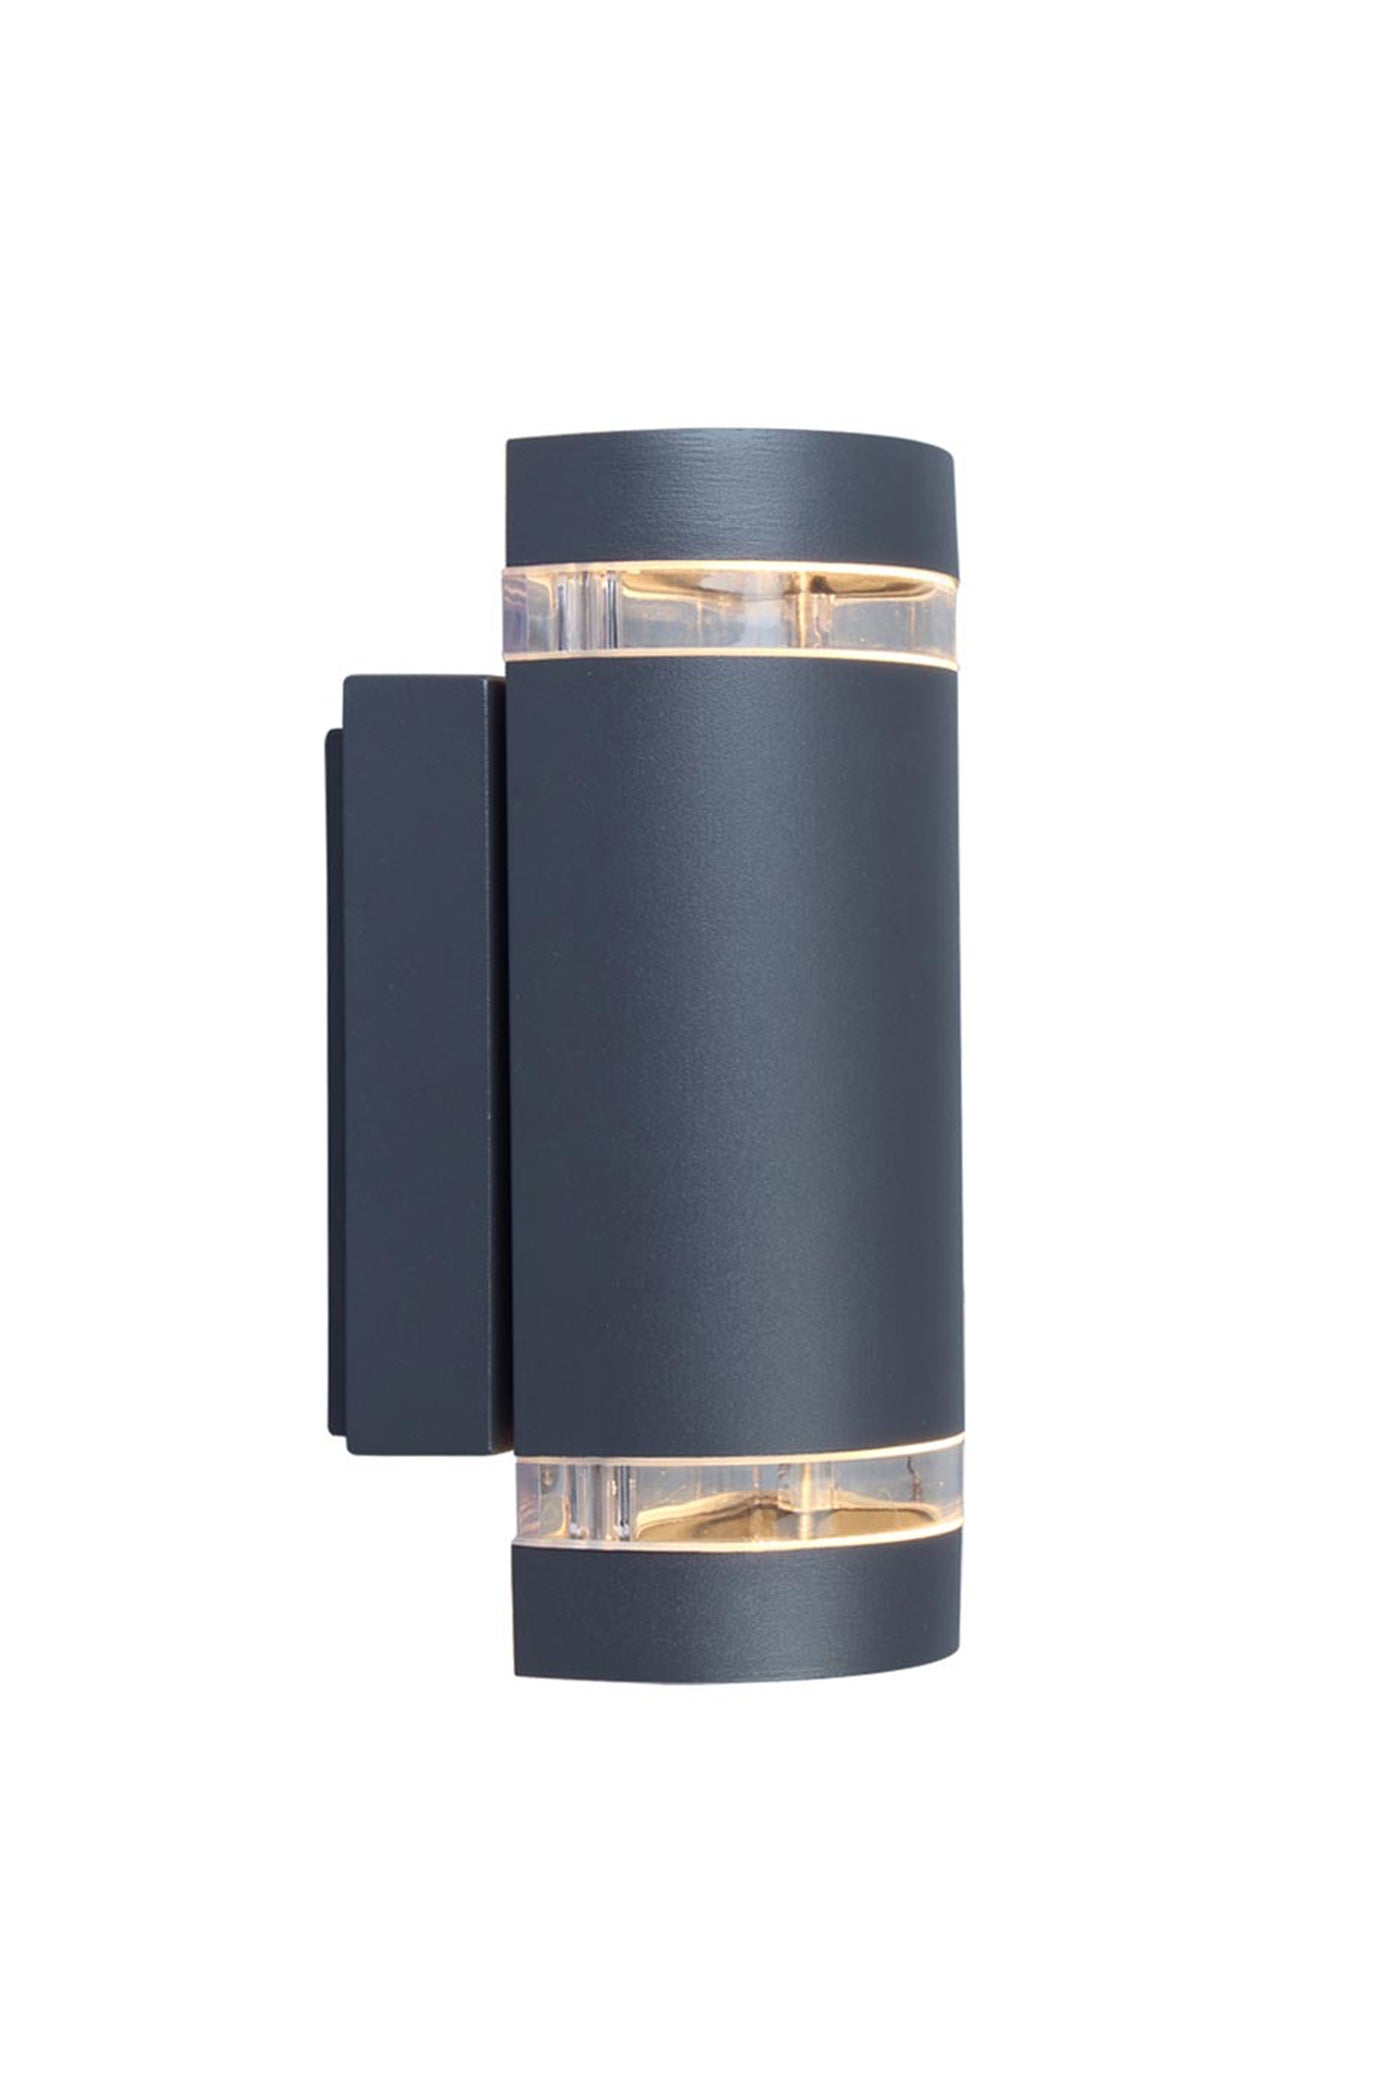 LUTEC-FOCUS Semi Cylinder LED Outdoor Up & Down Wall Sconces, 2*GU10, 2*6W, 650LM, 2700K